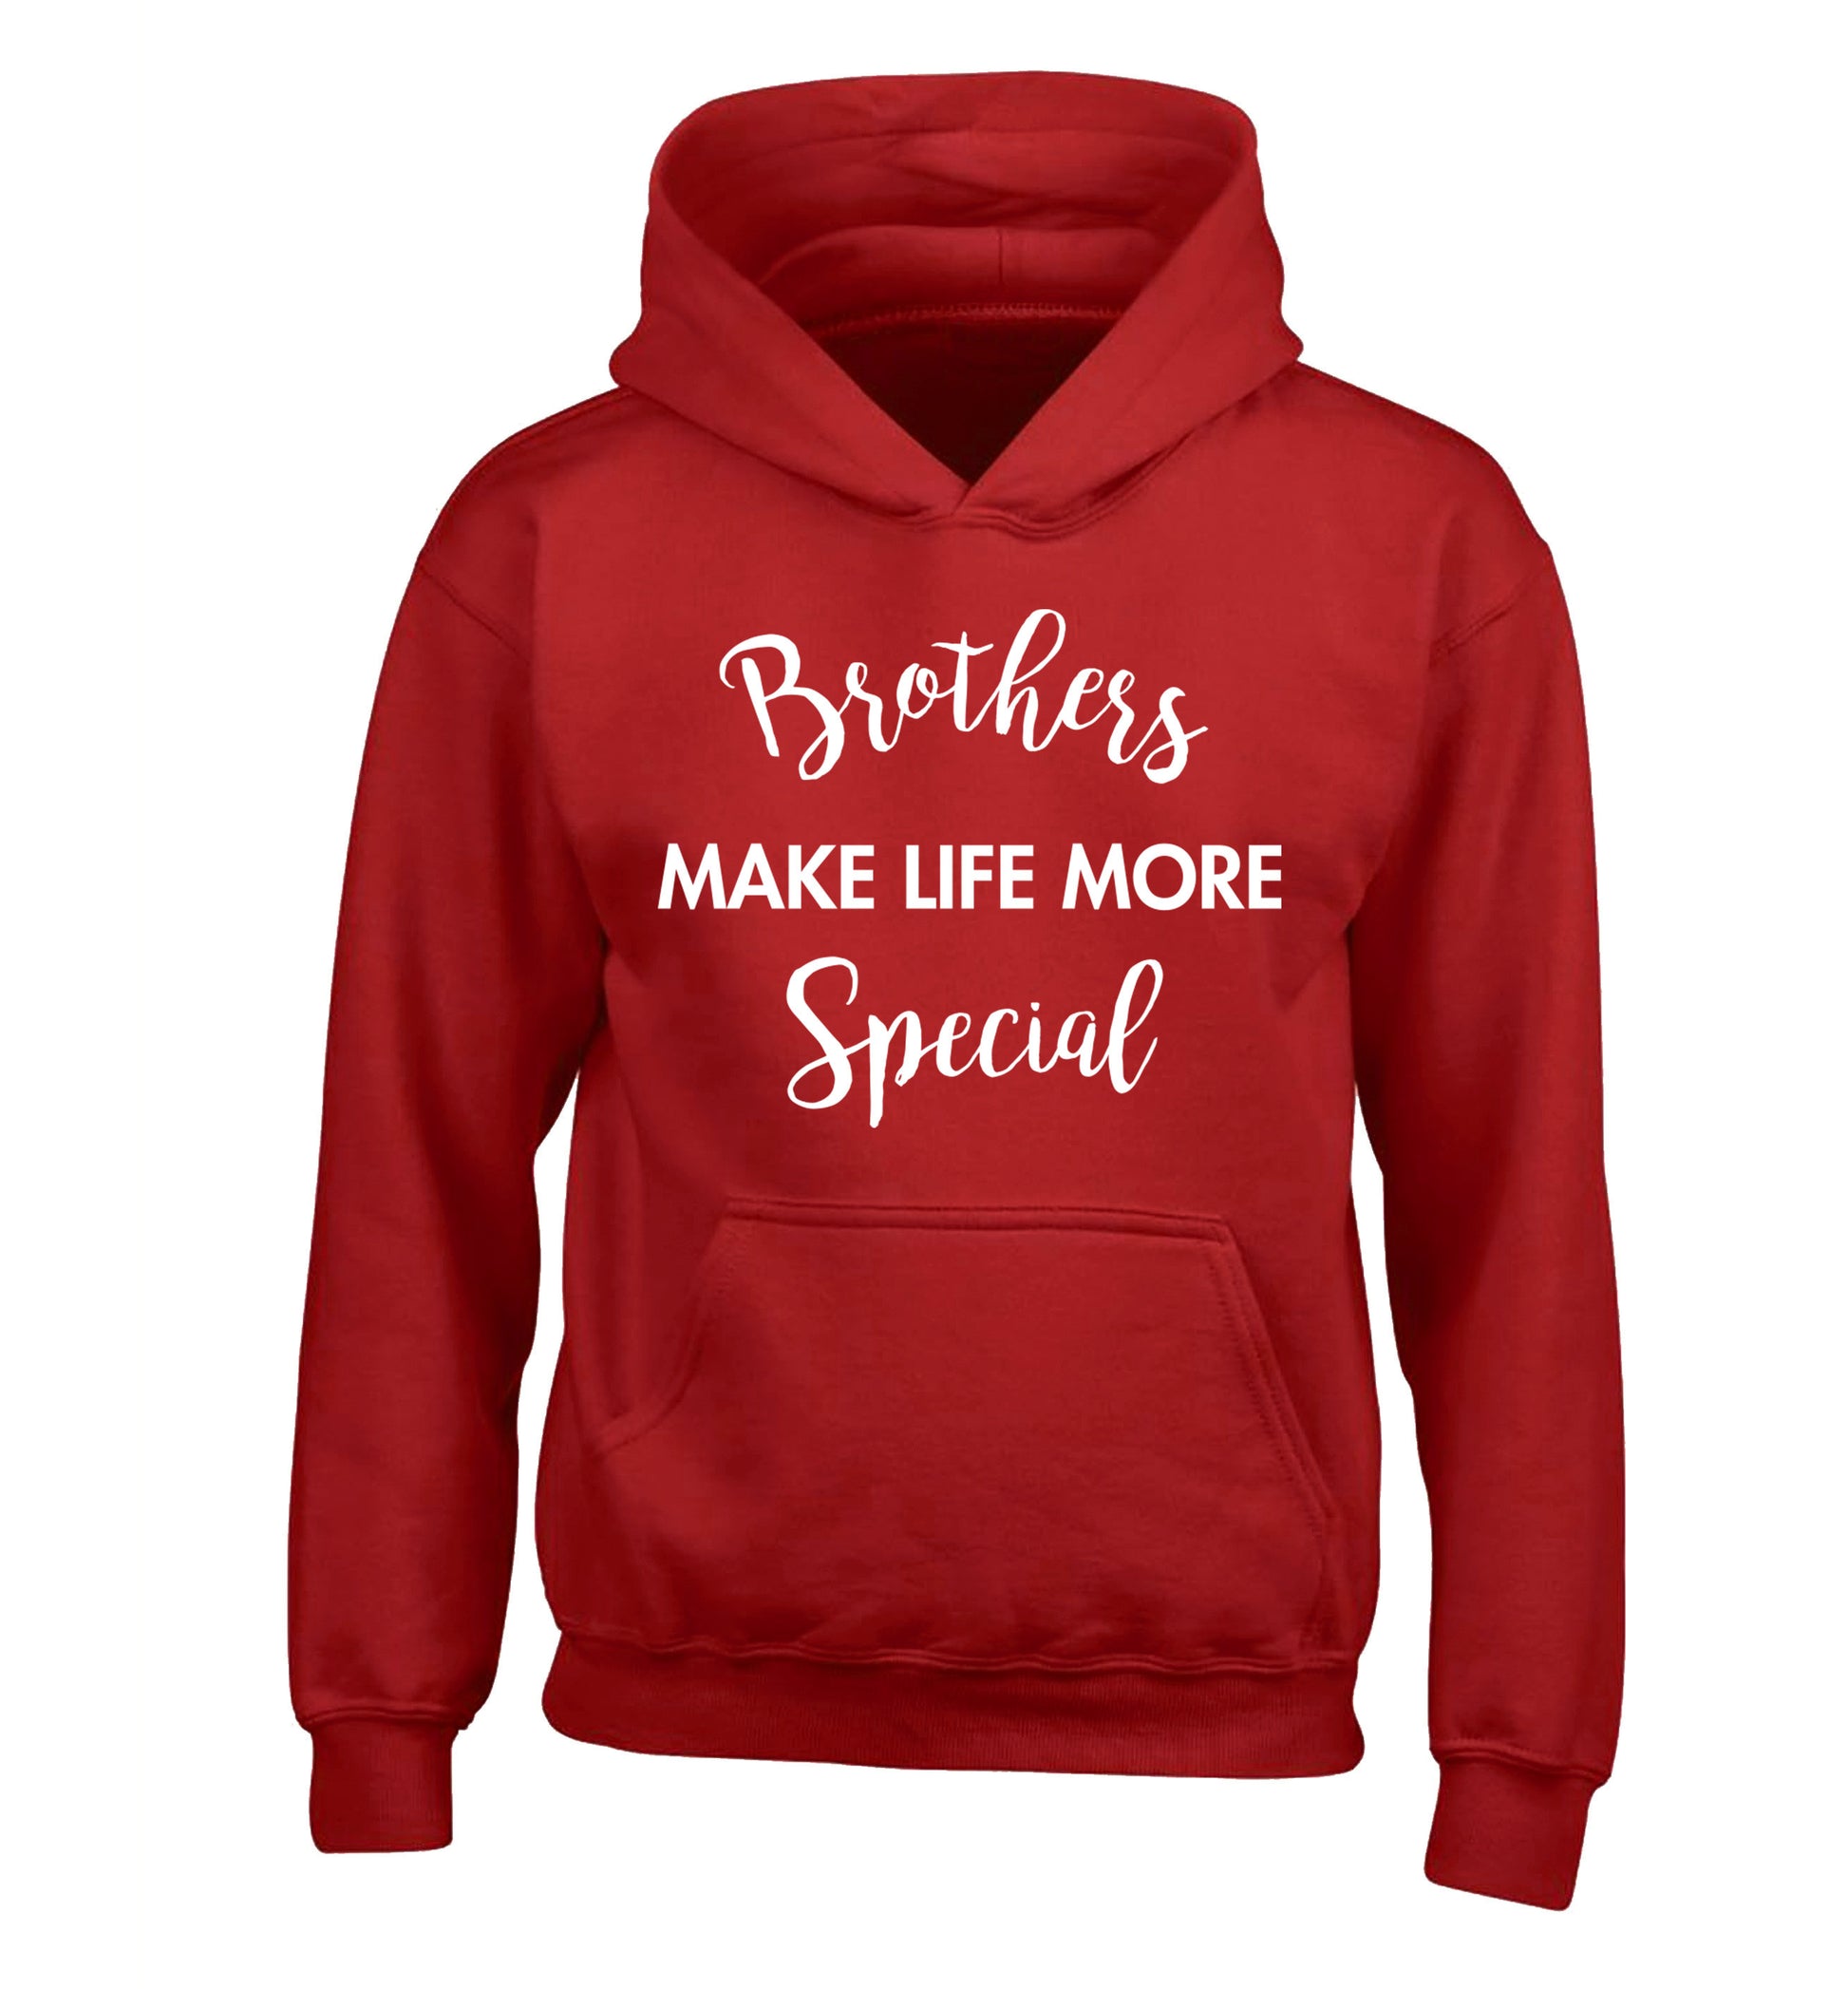 Brothers make life more special children's red hoodie 12-14 Years